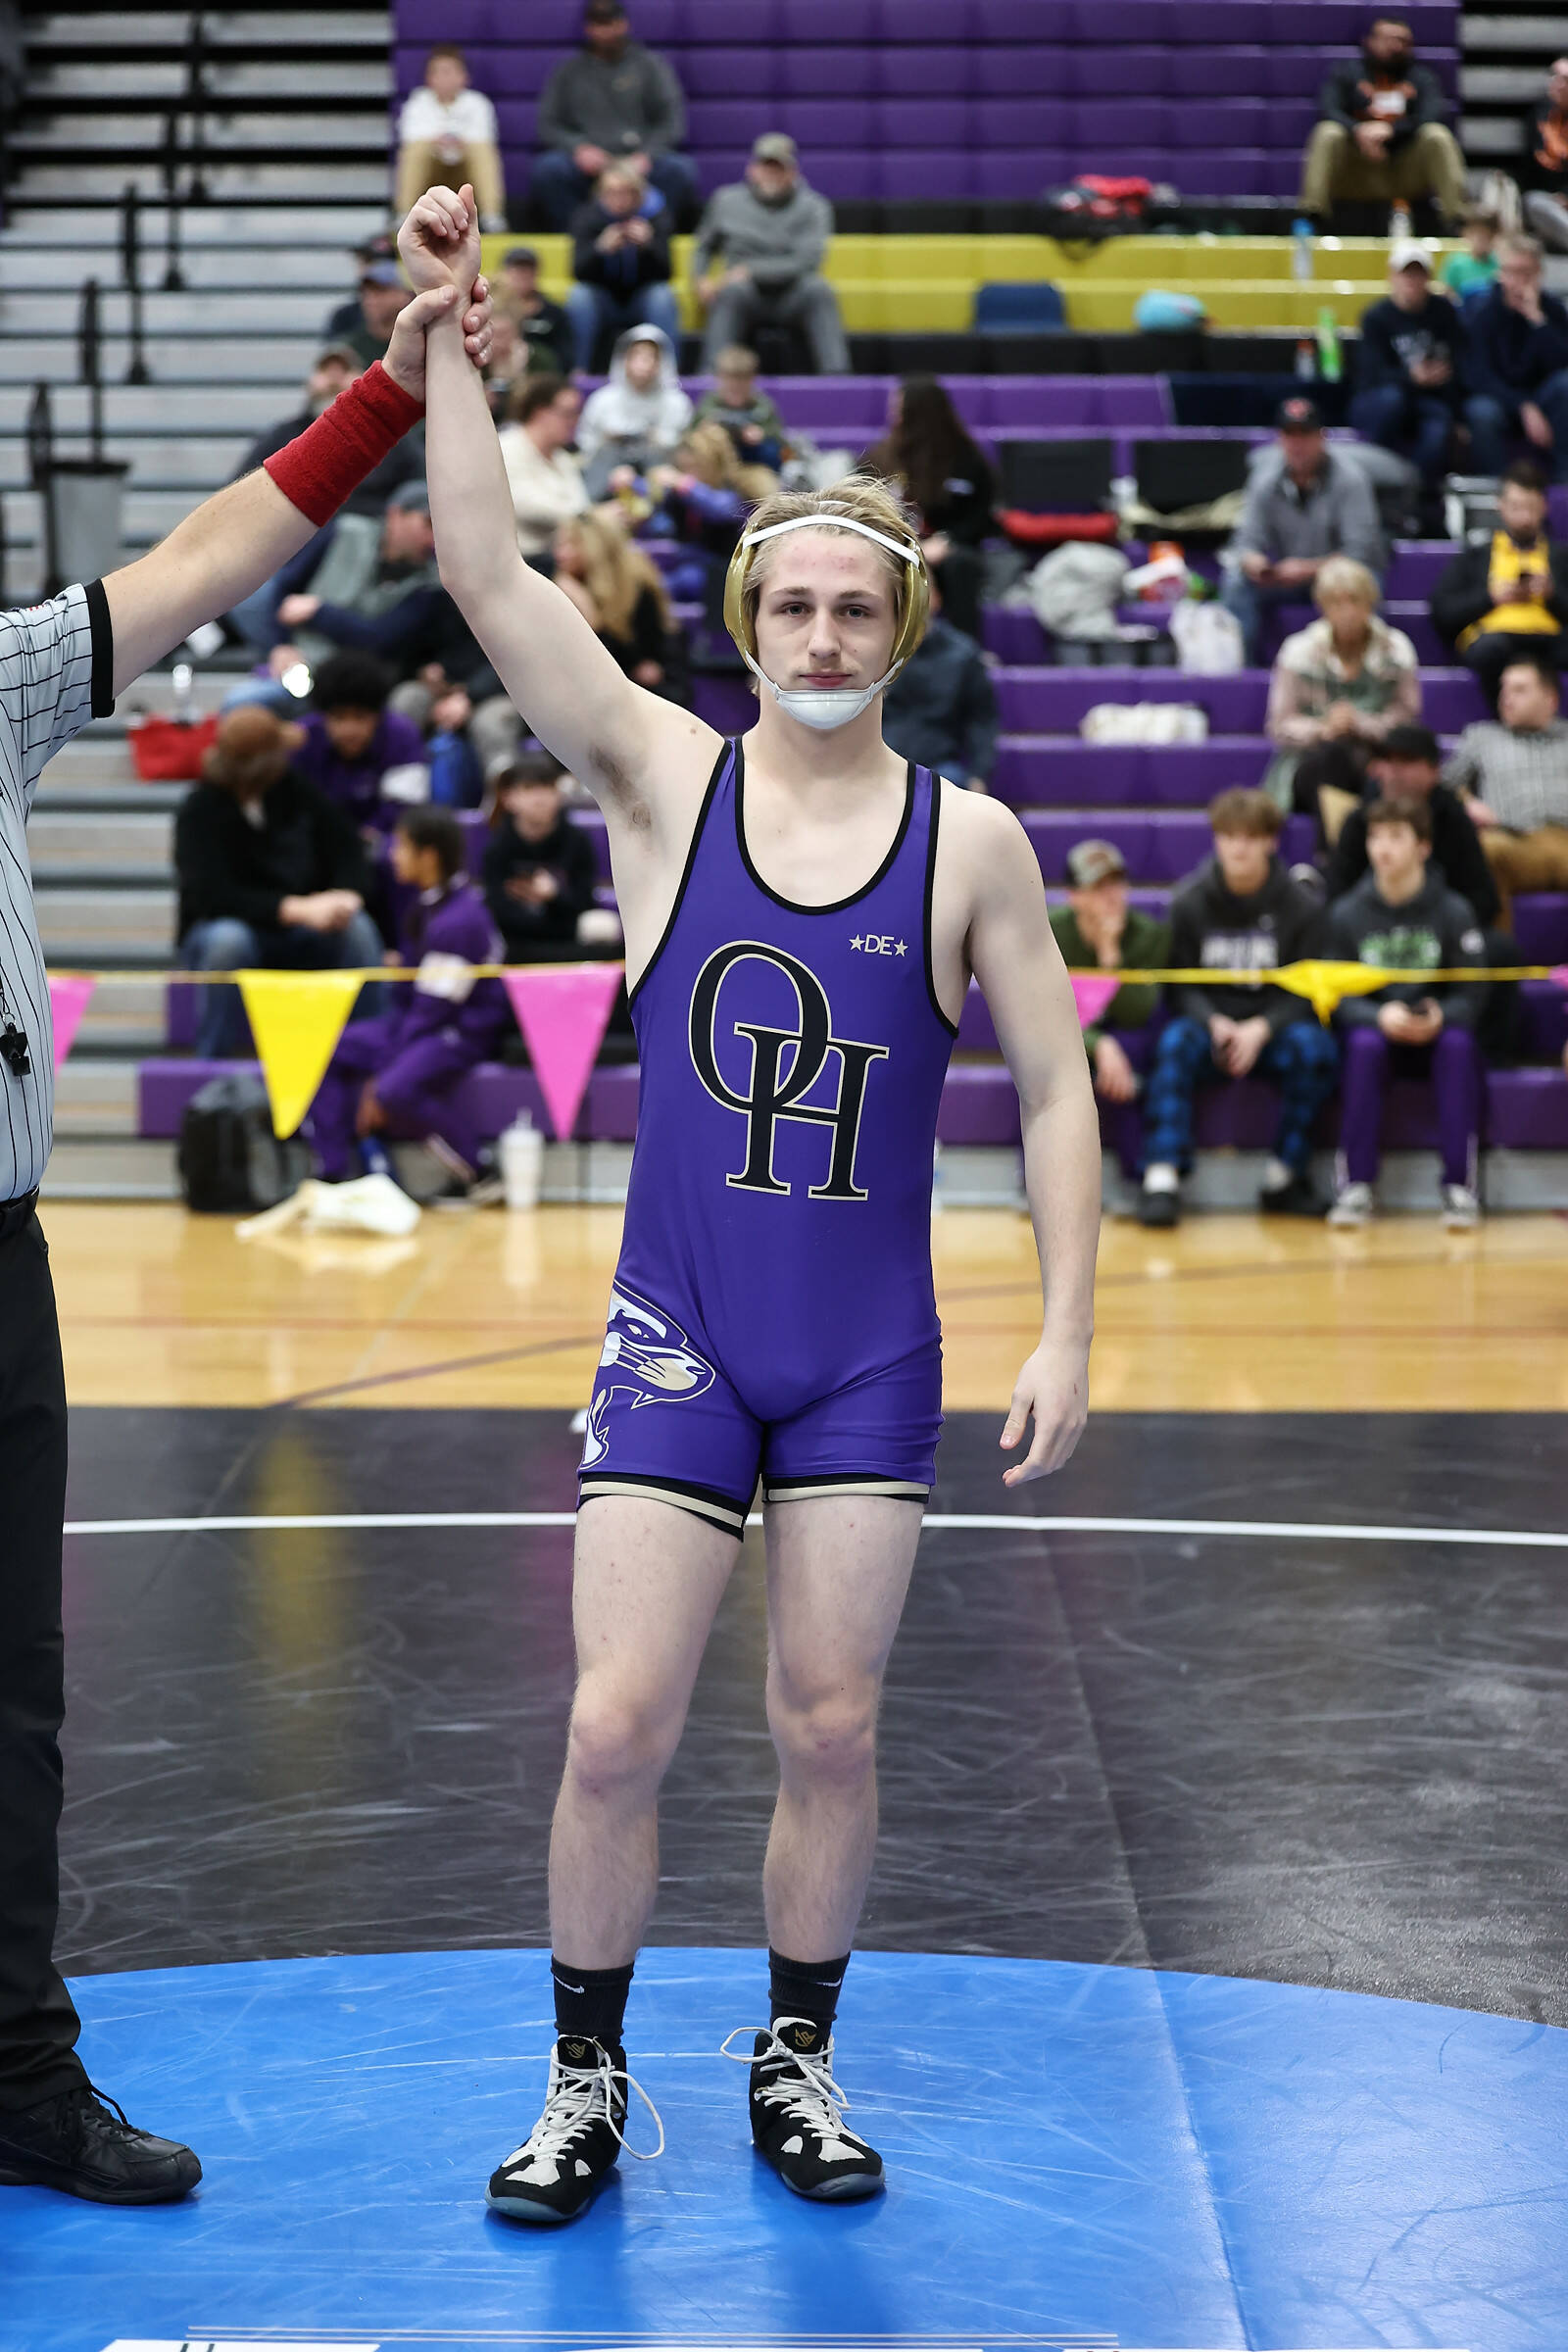 Oak Harbor’s Percie Hatfield has his hand raised in victory after a match during the regional tournament that took place Saturday at Oak Harbor High School. He placed first at 157 pounds and he will advance to the Mat Classic this weekend in Tacoma. (Photo by John Fisken)